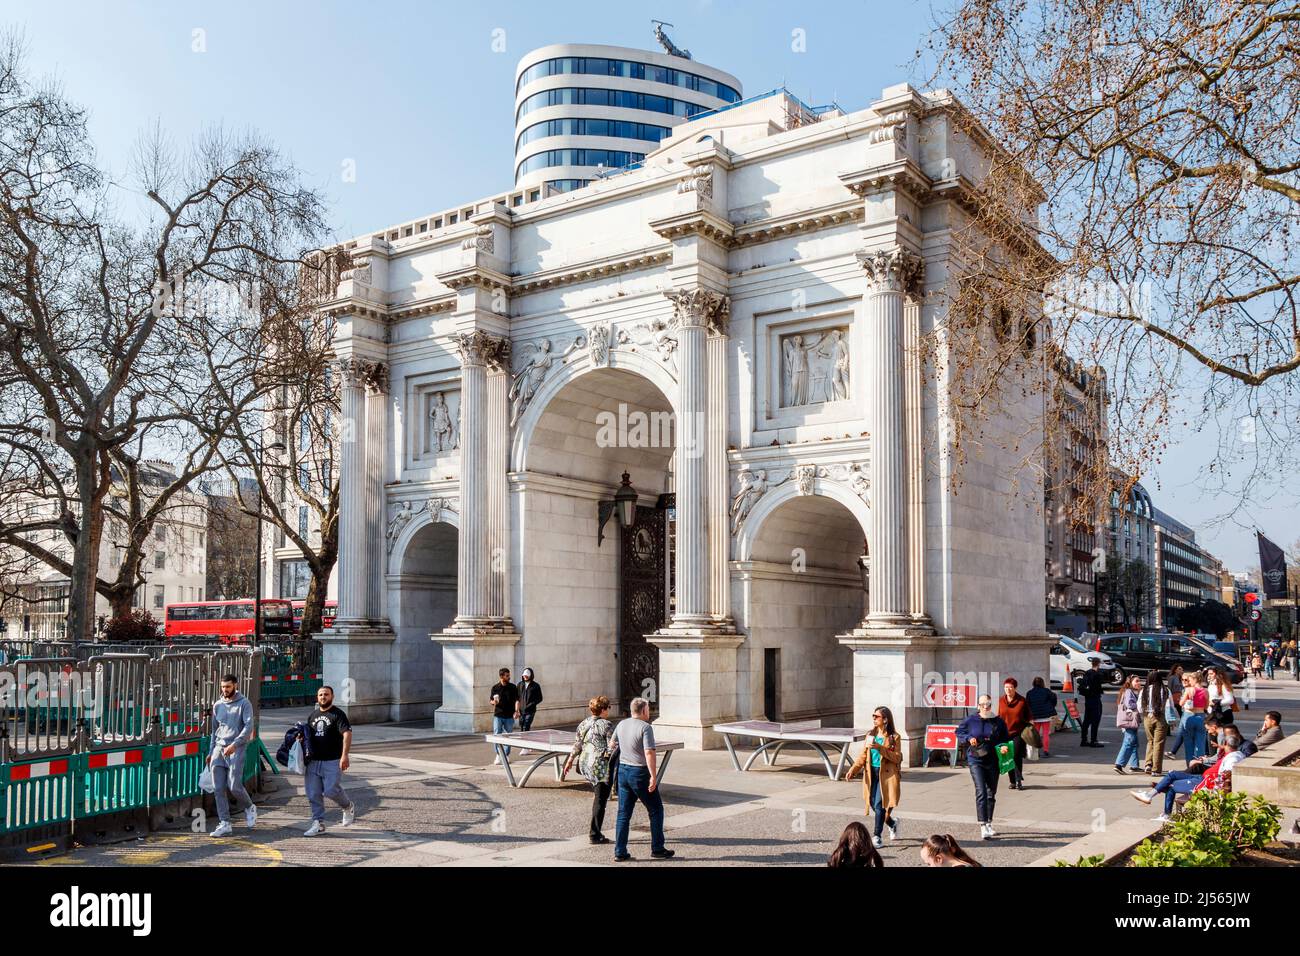 Marble Arch, a 19th-century white marble-faced triumphal arch, designed by John Nash, in London, UK. Stock Photo